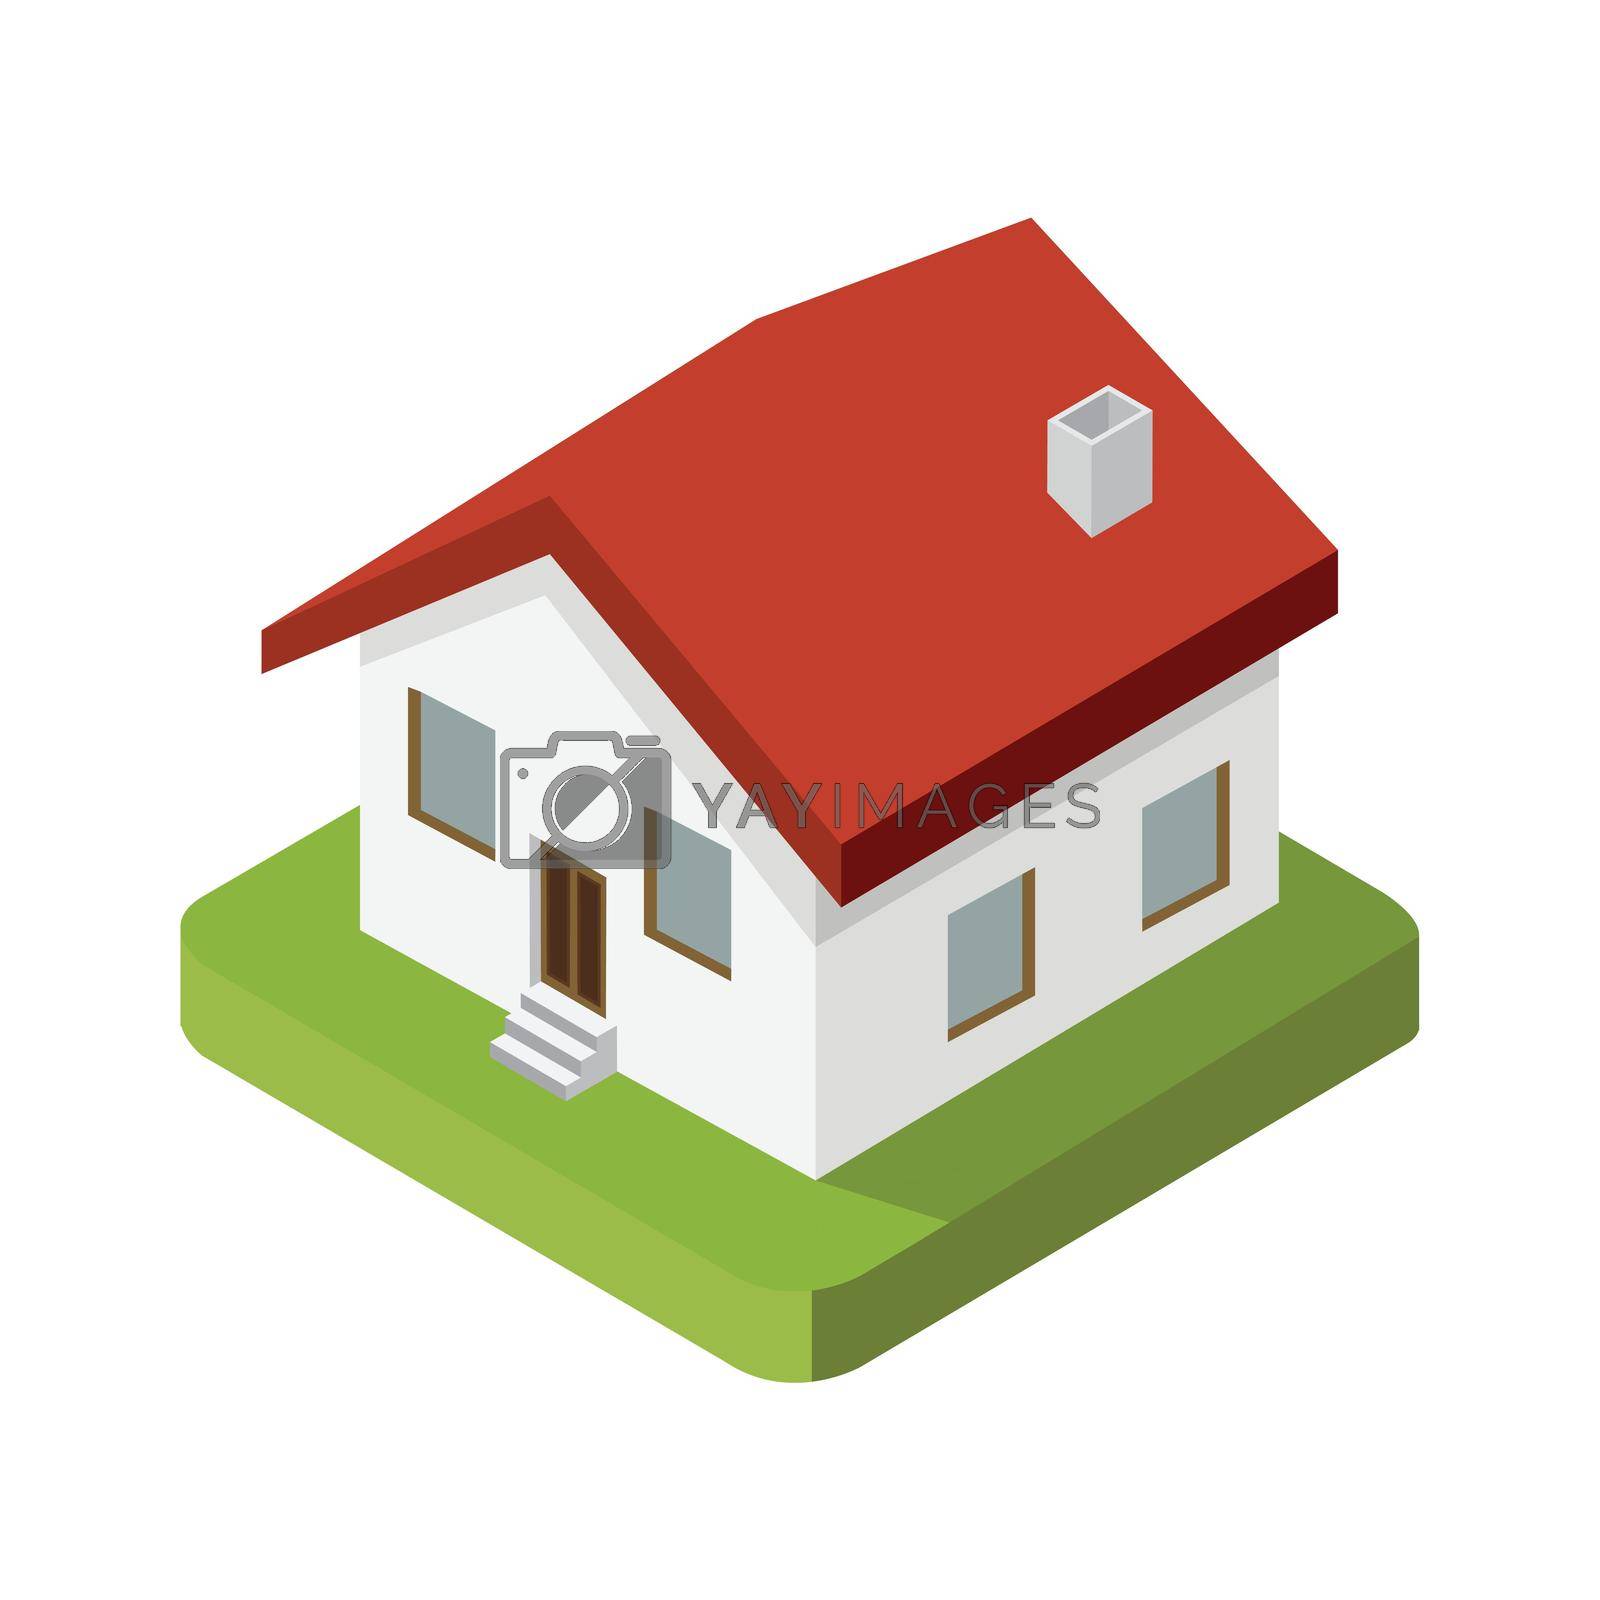 Royalty free image of House isometric flat icon 3d vector  by focus_bell